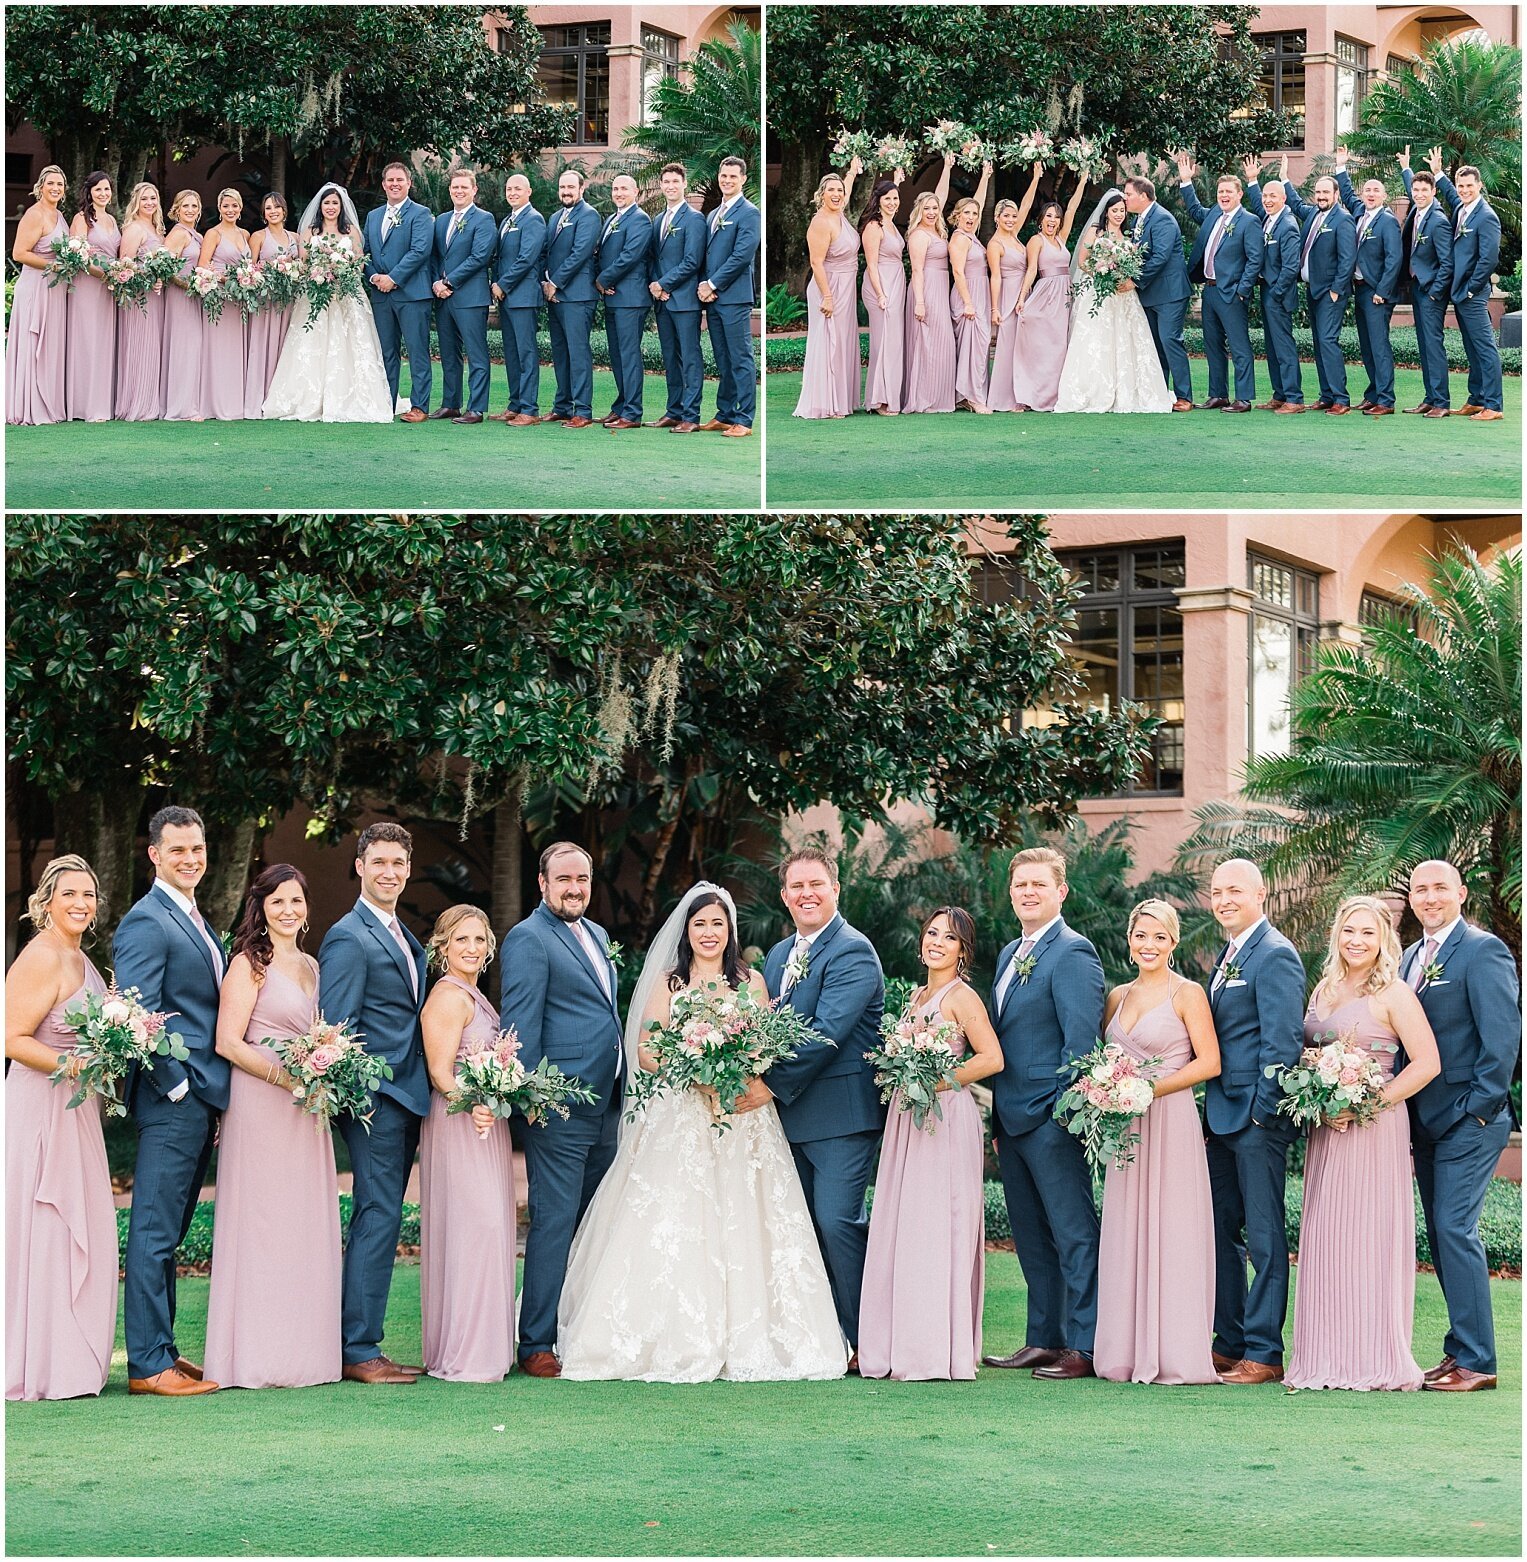 The entire bridal party picture and posing ideas